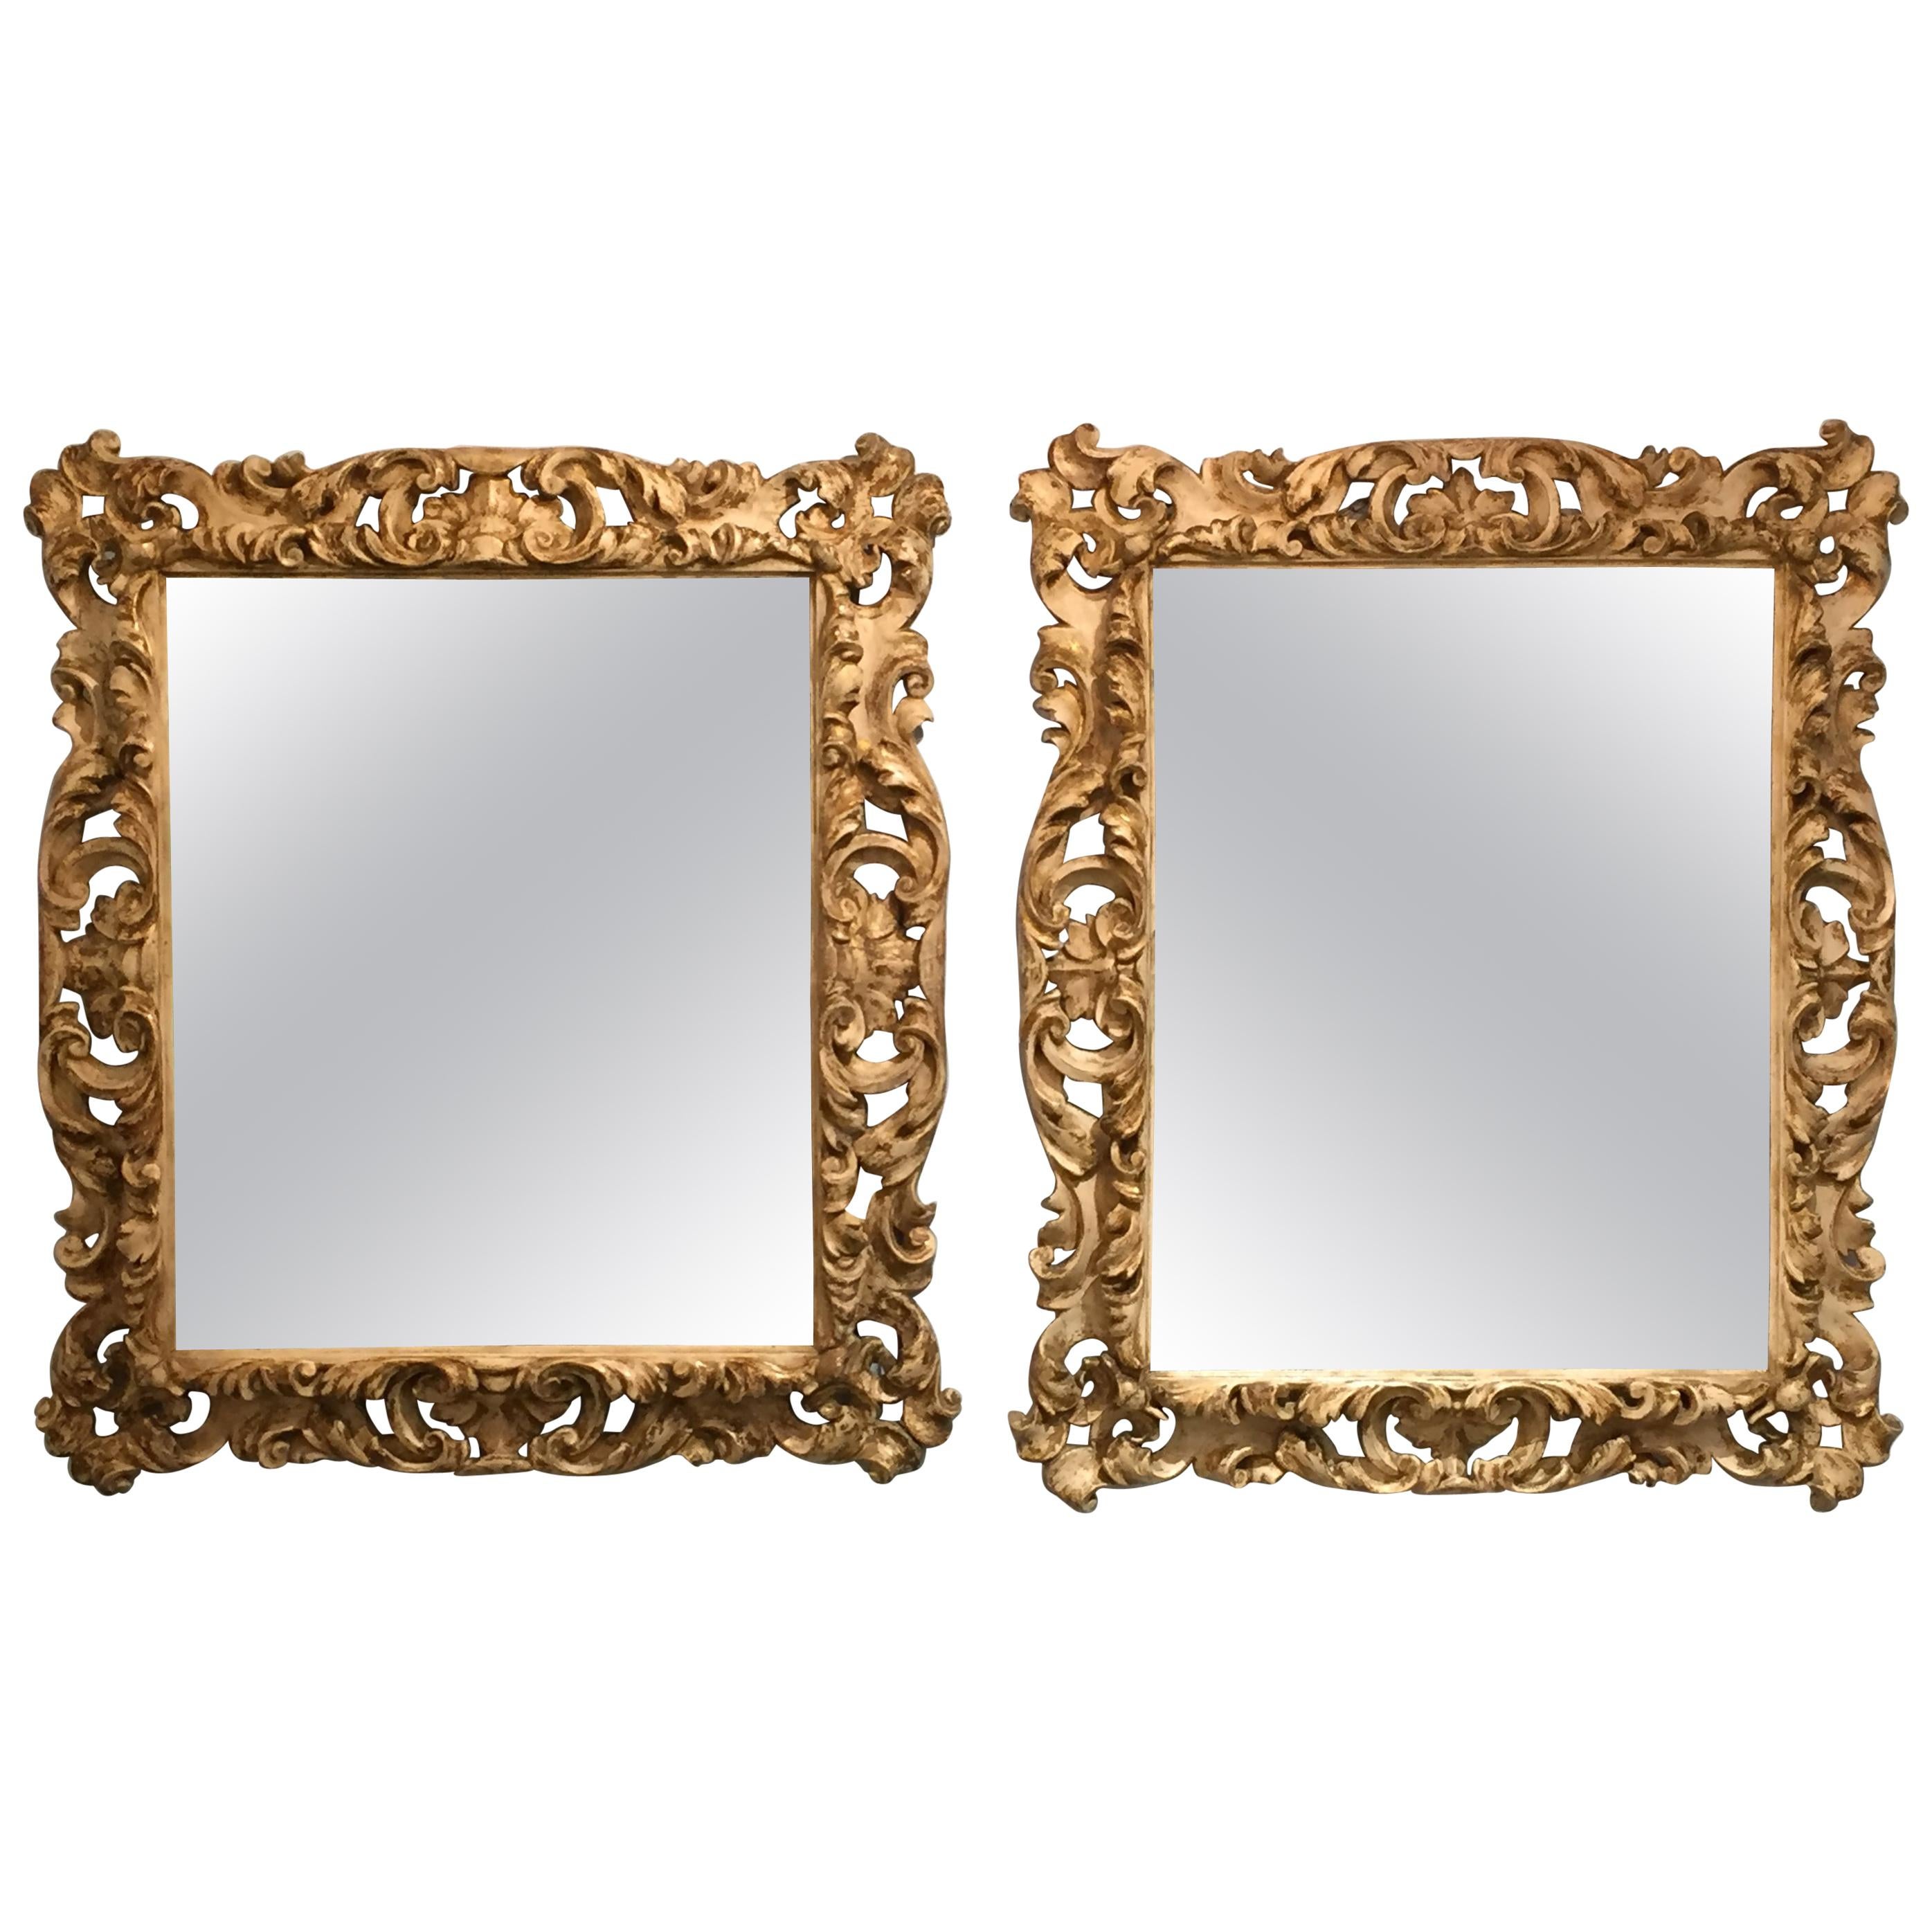 Pair of 17th Century English Carved Wood, Gesso and Parcel Gilt Frames